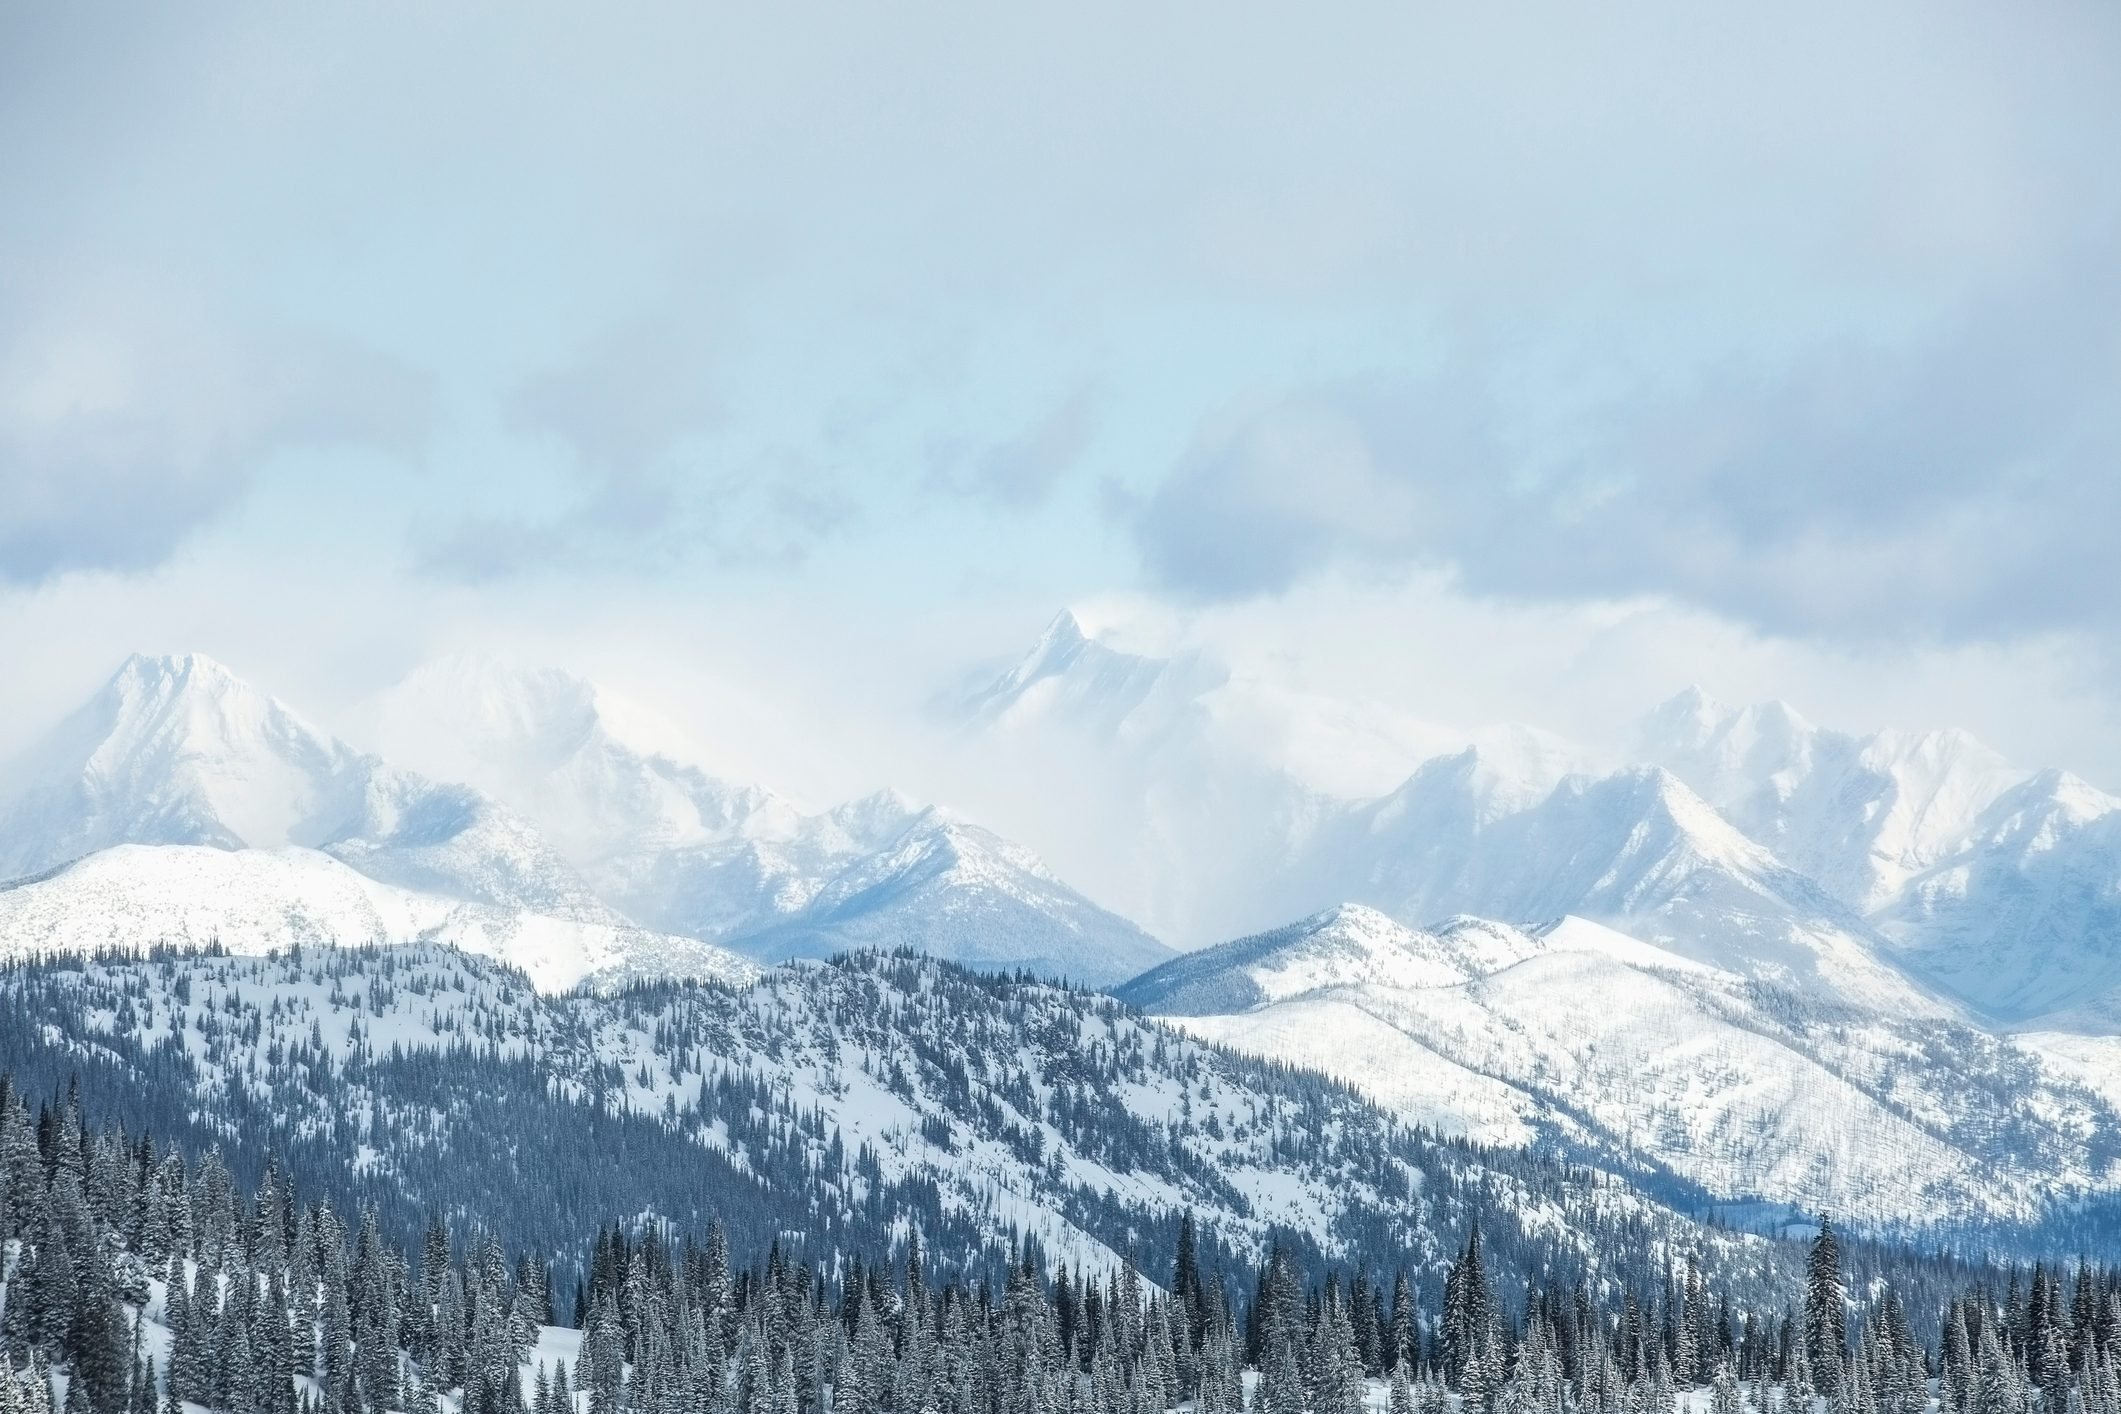 Montana, Glacier National Park, Landscape with mountains and forest in winter